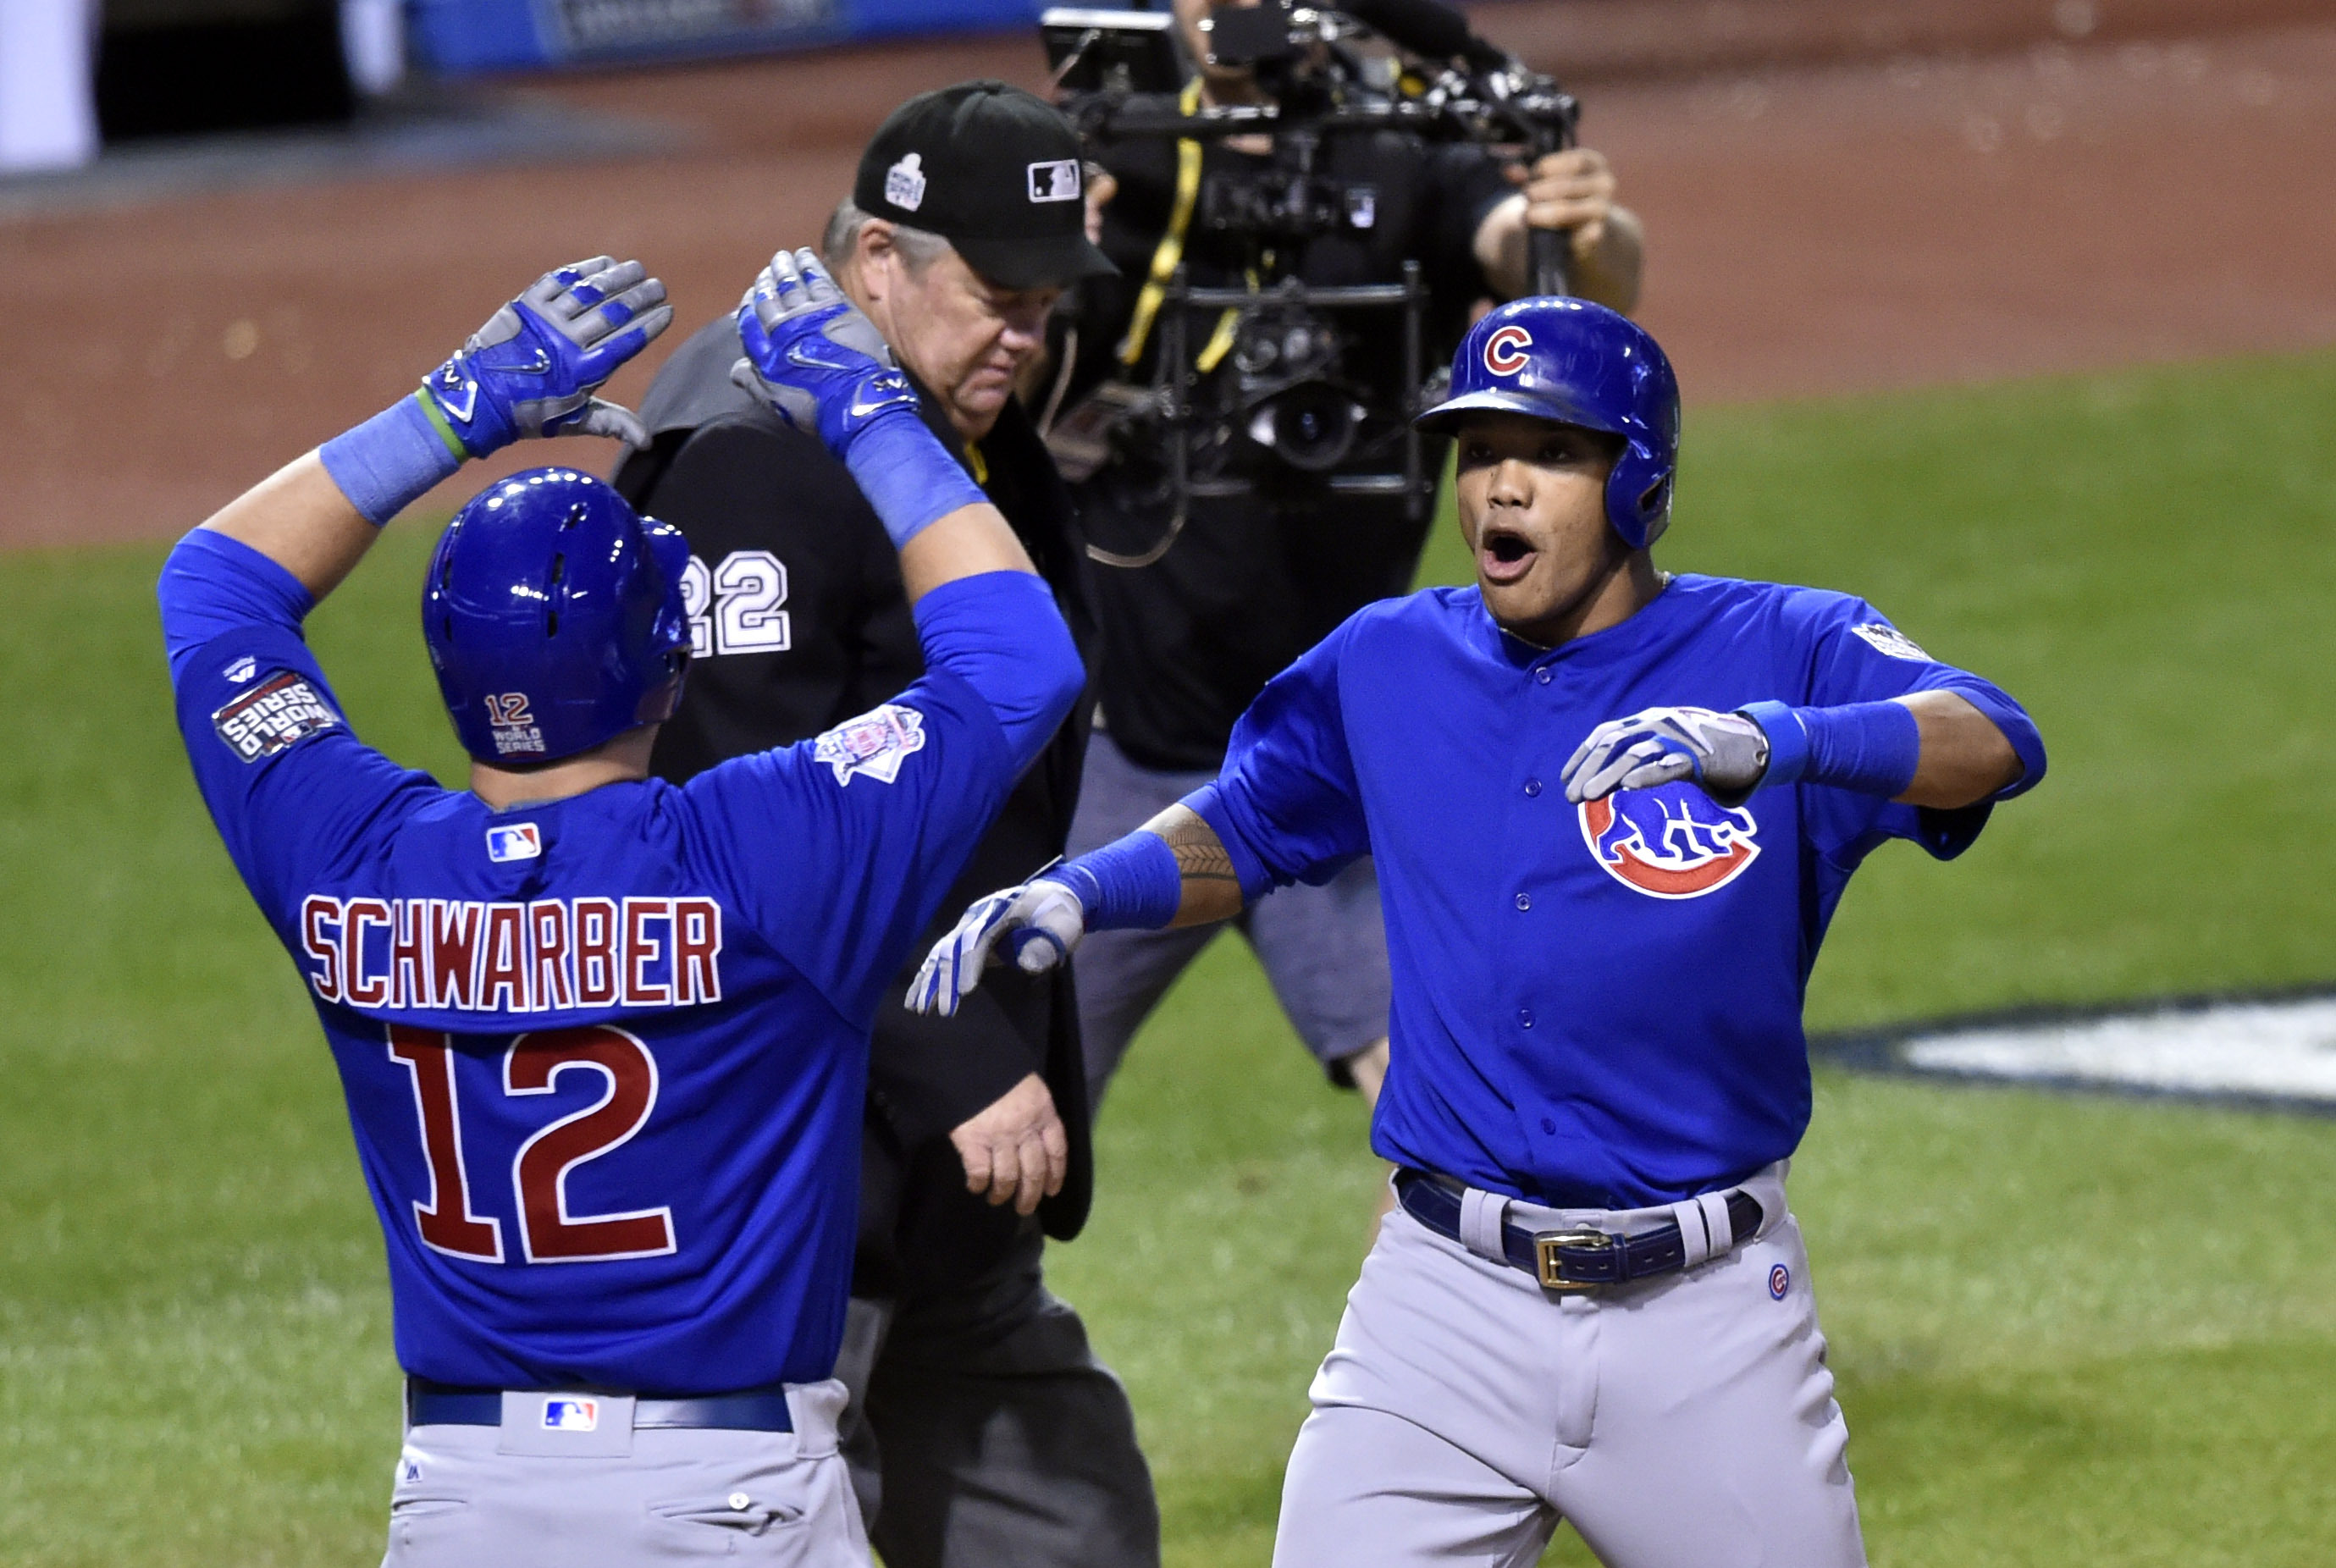 Cubs force World Series Game 7 behind Addison Russell's historic night